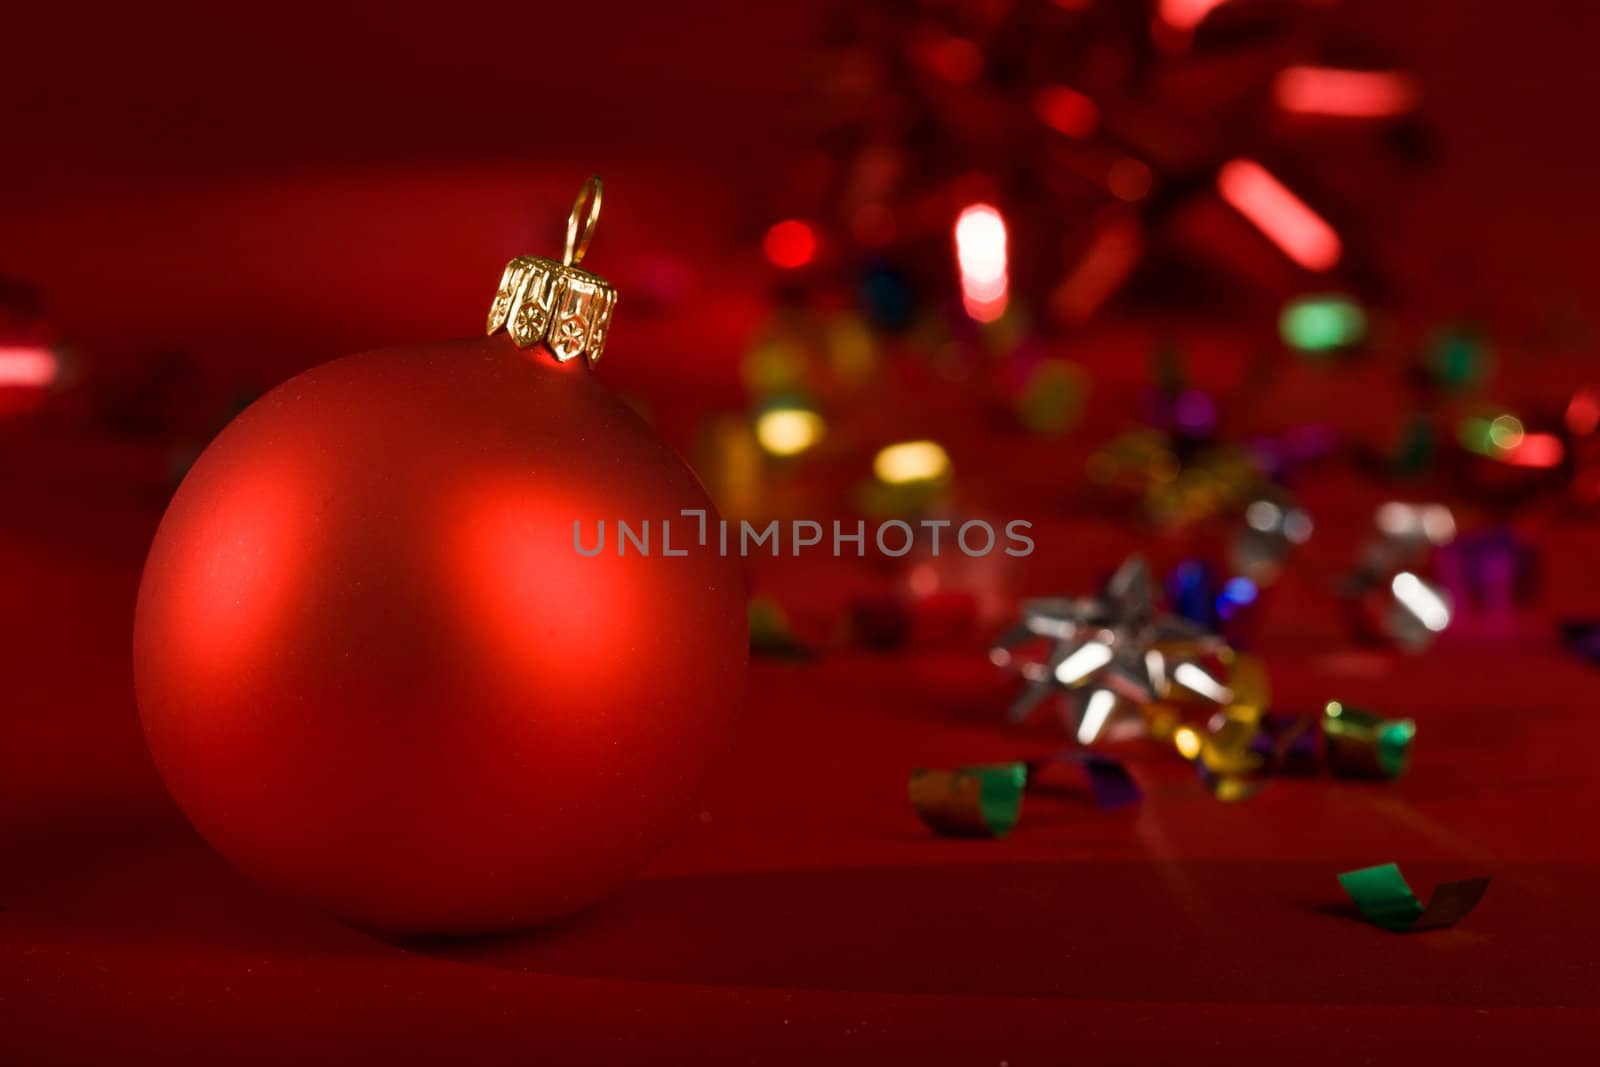 holiday series: some red christms ball over red background